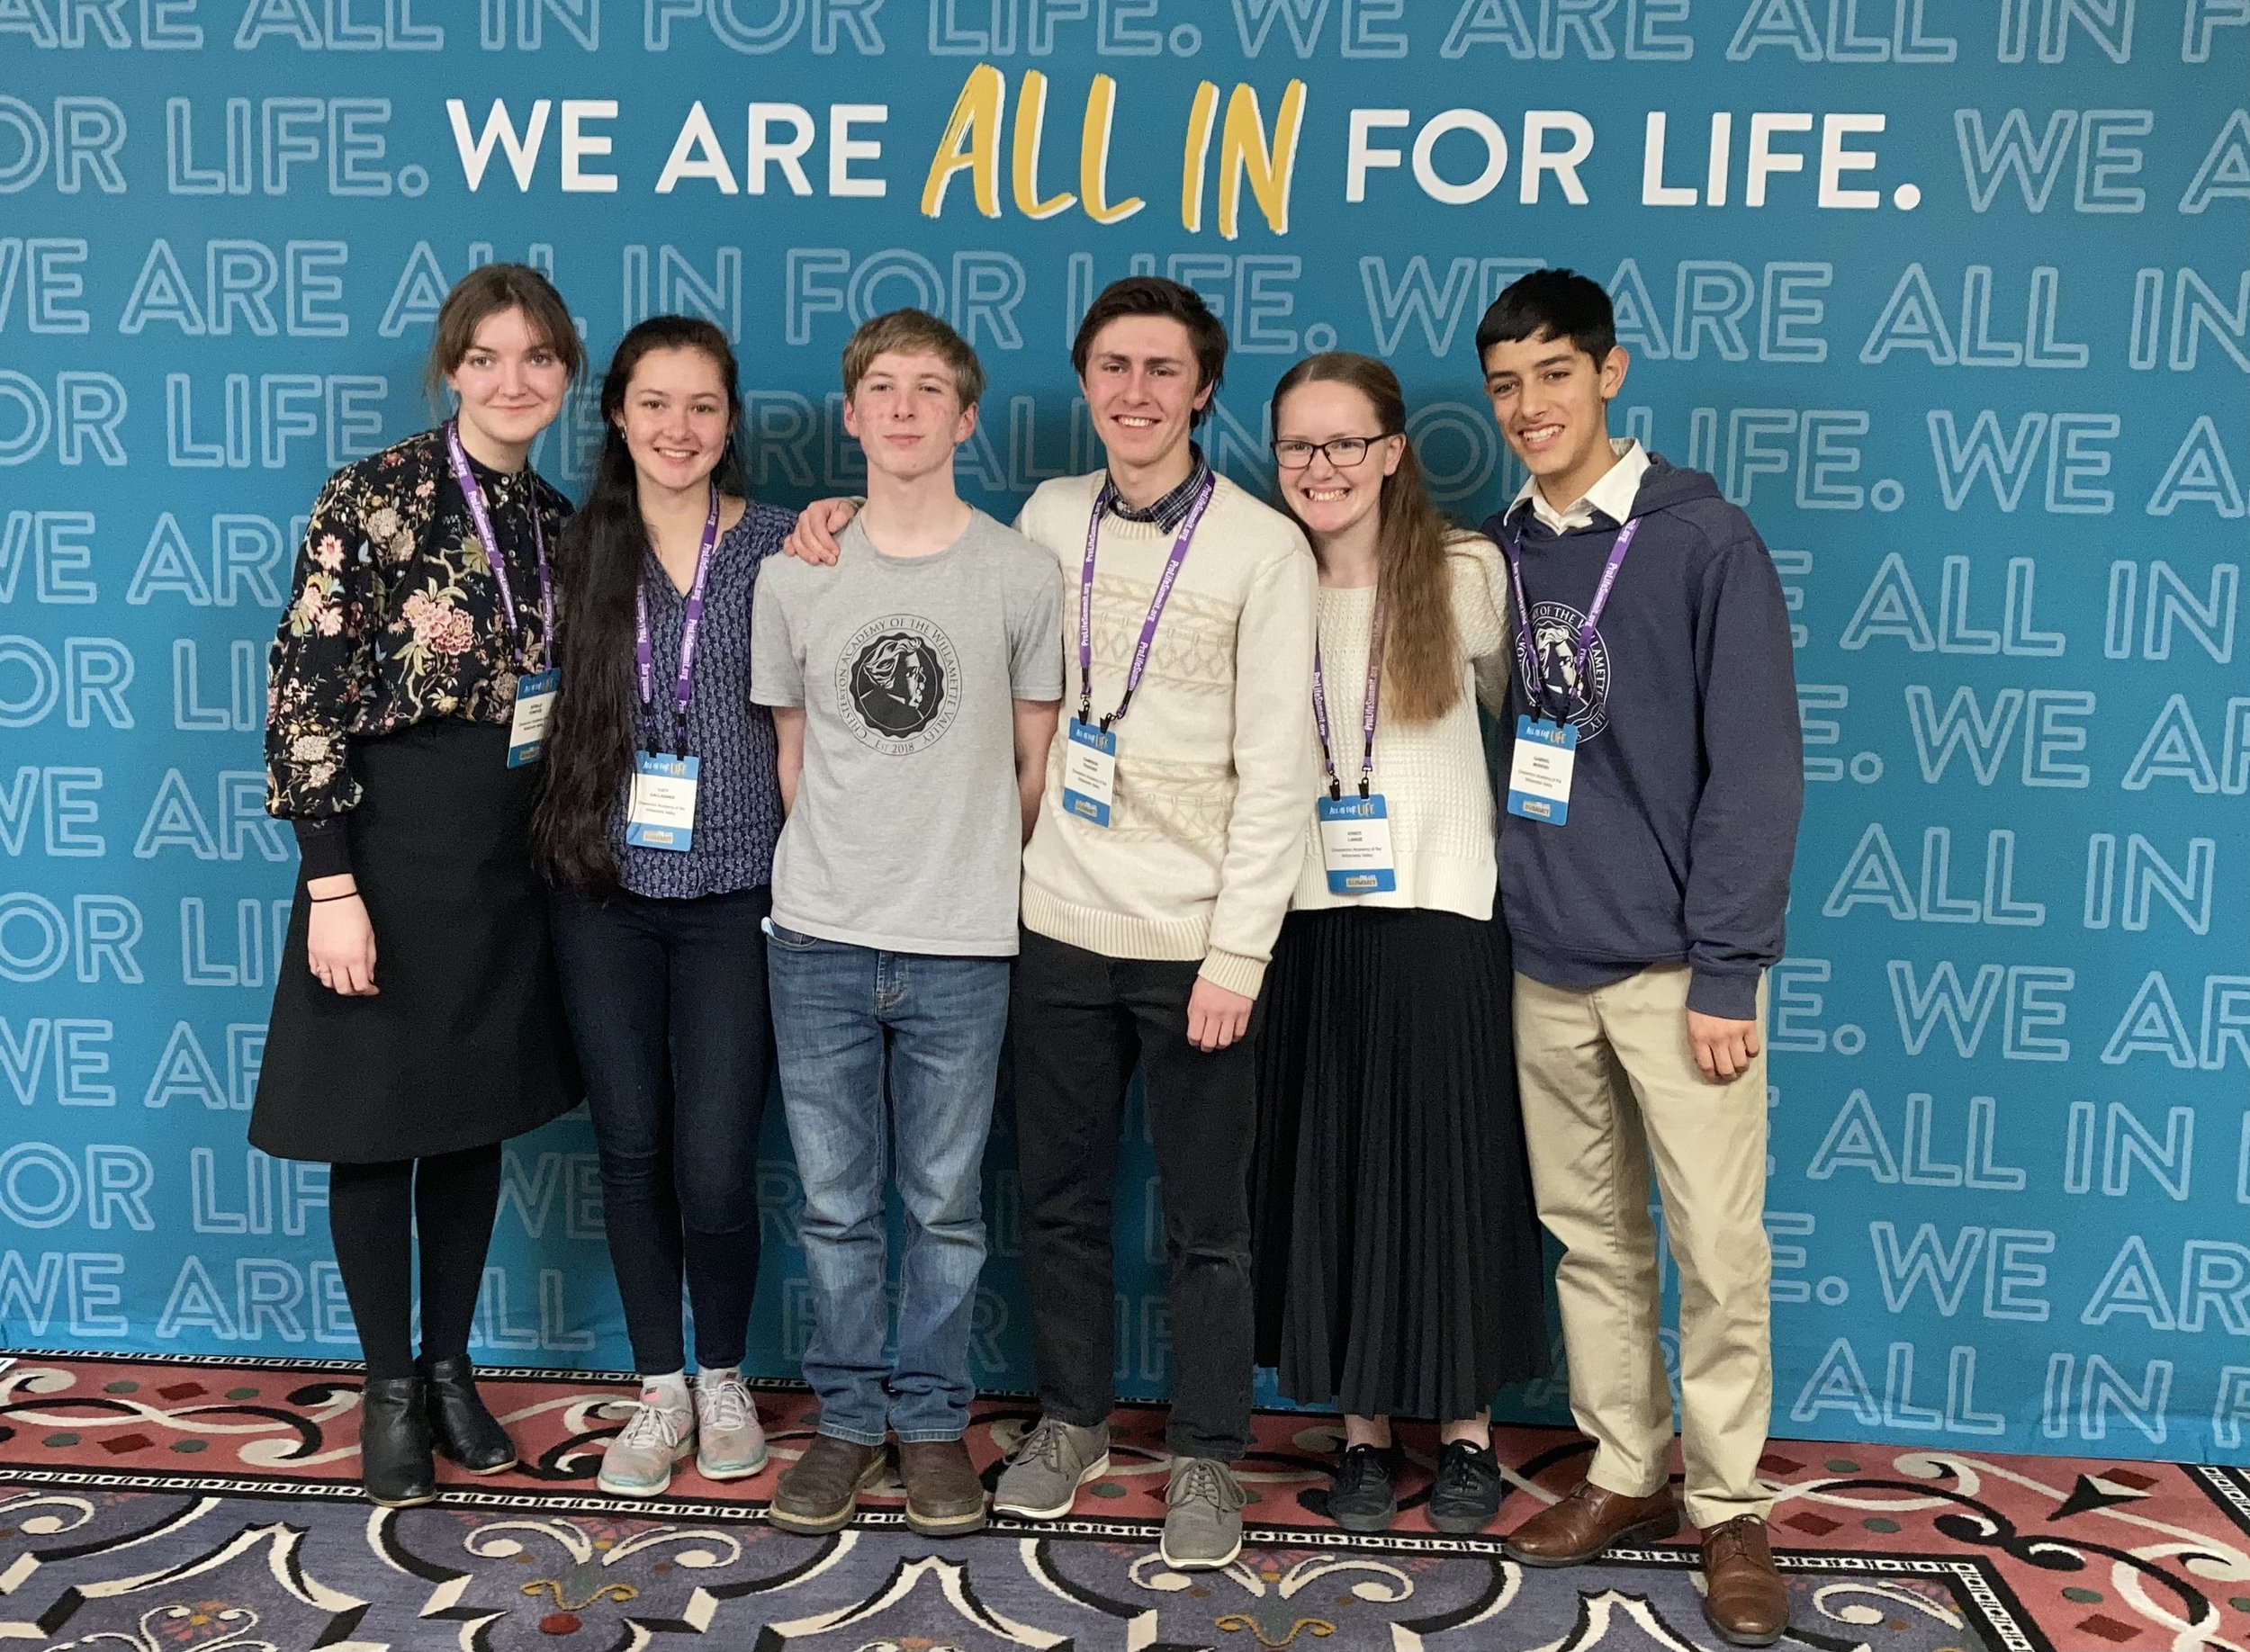  Students for Life National Pro-Life Summit! 